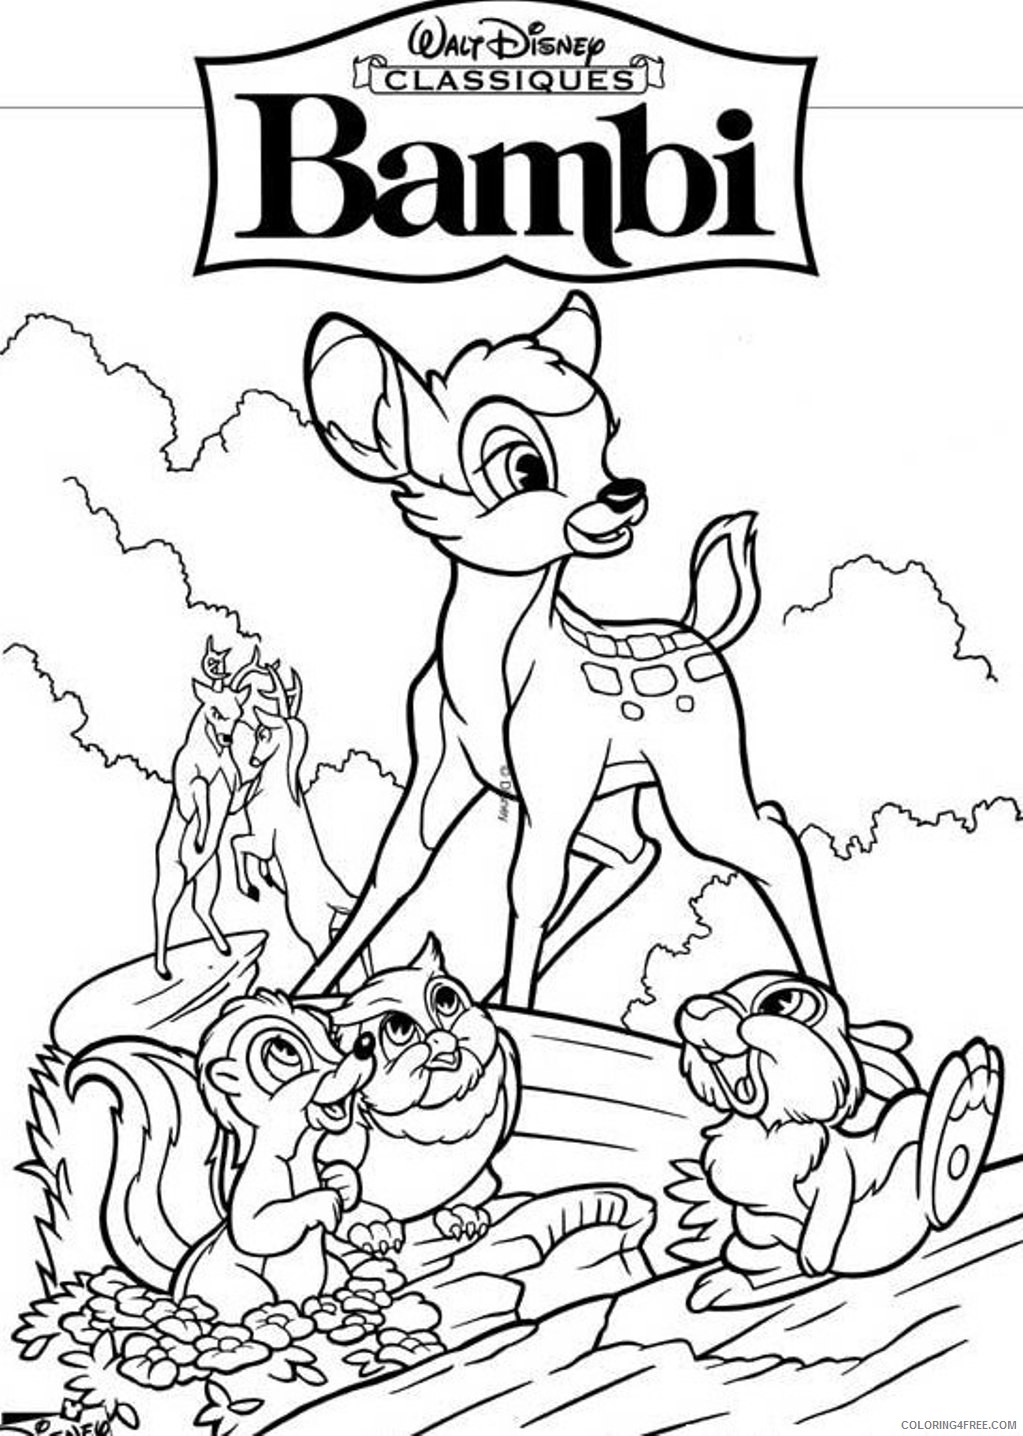 disney bambi coloring pages to print Coloring4free